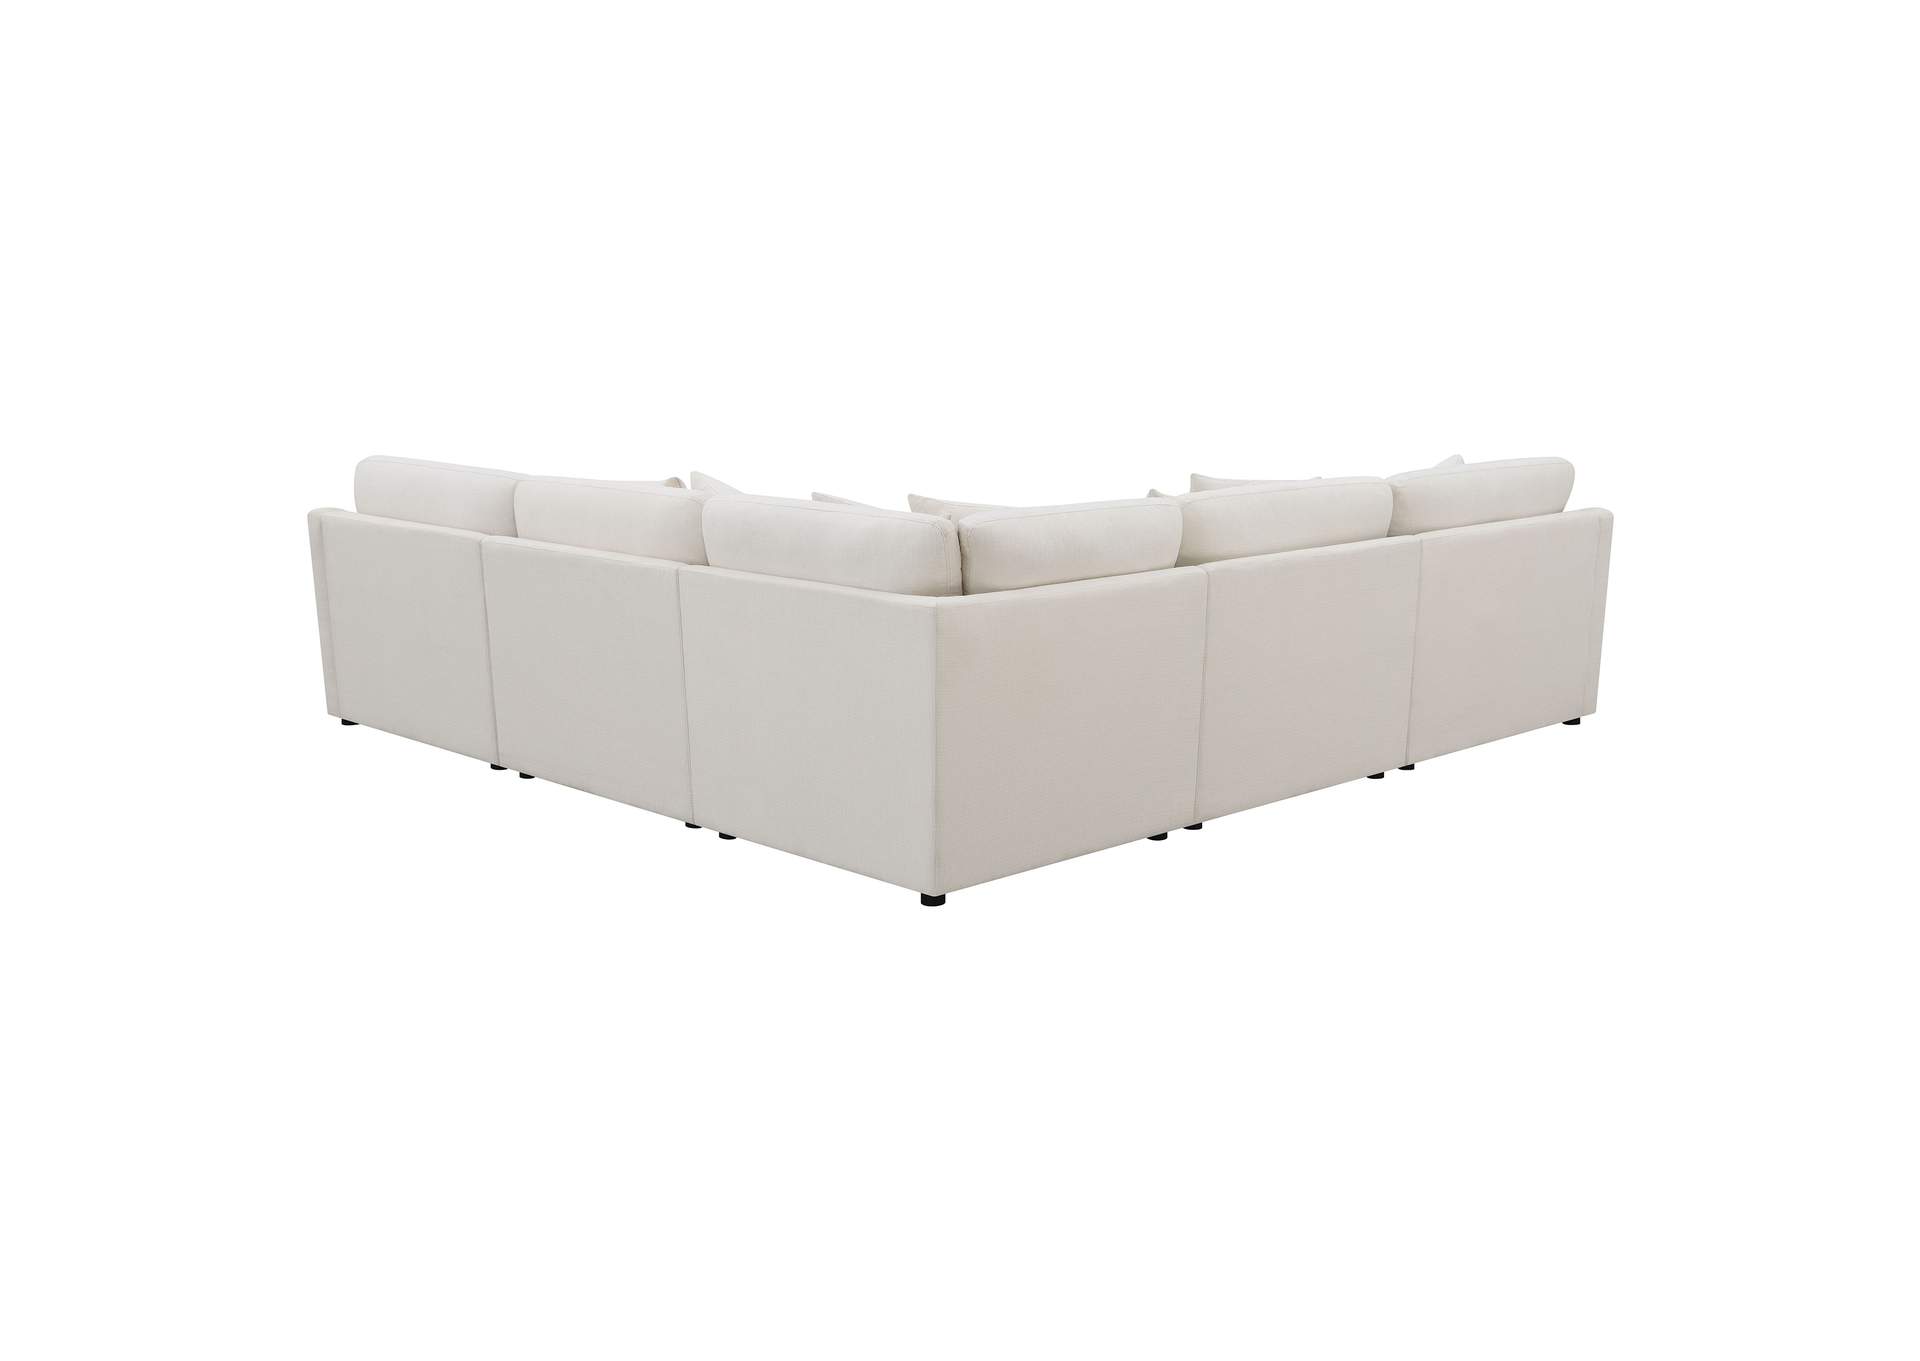 Hobson 6-piece Reversible Cushion Modular Sectional Off-White,Coaster Furniture